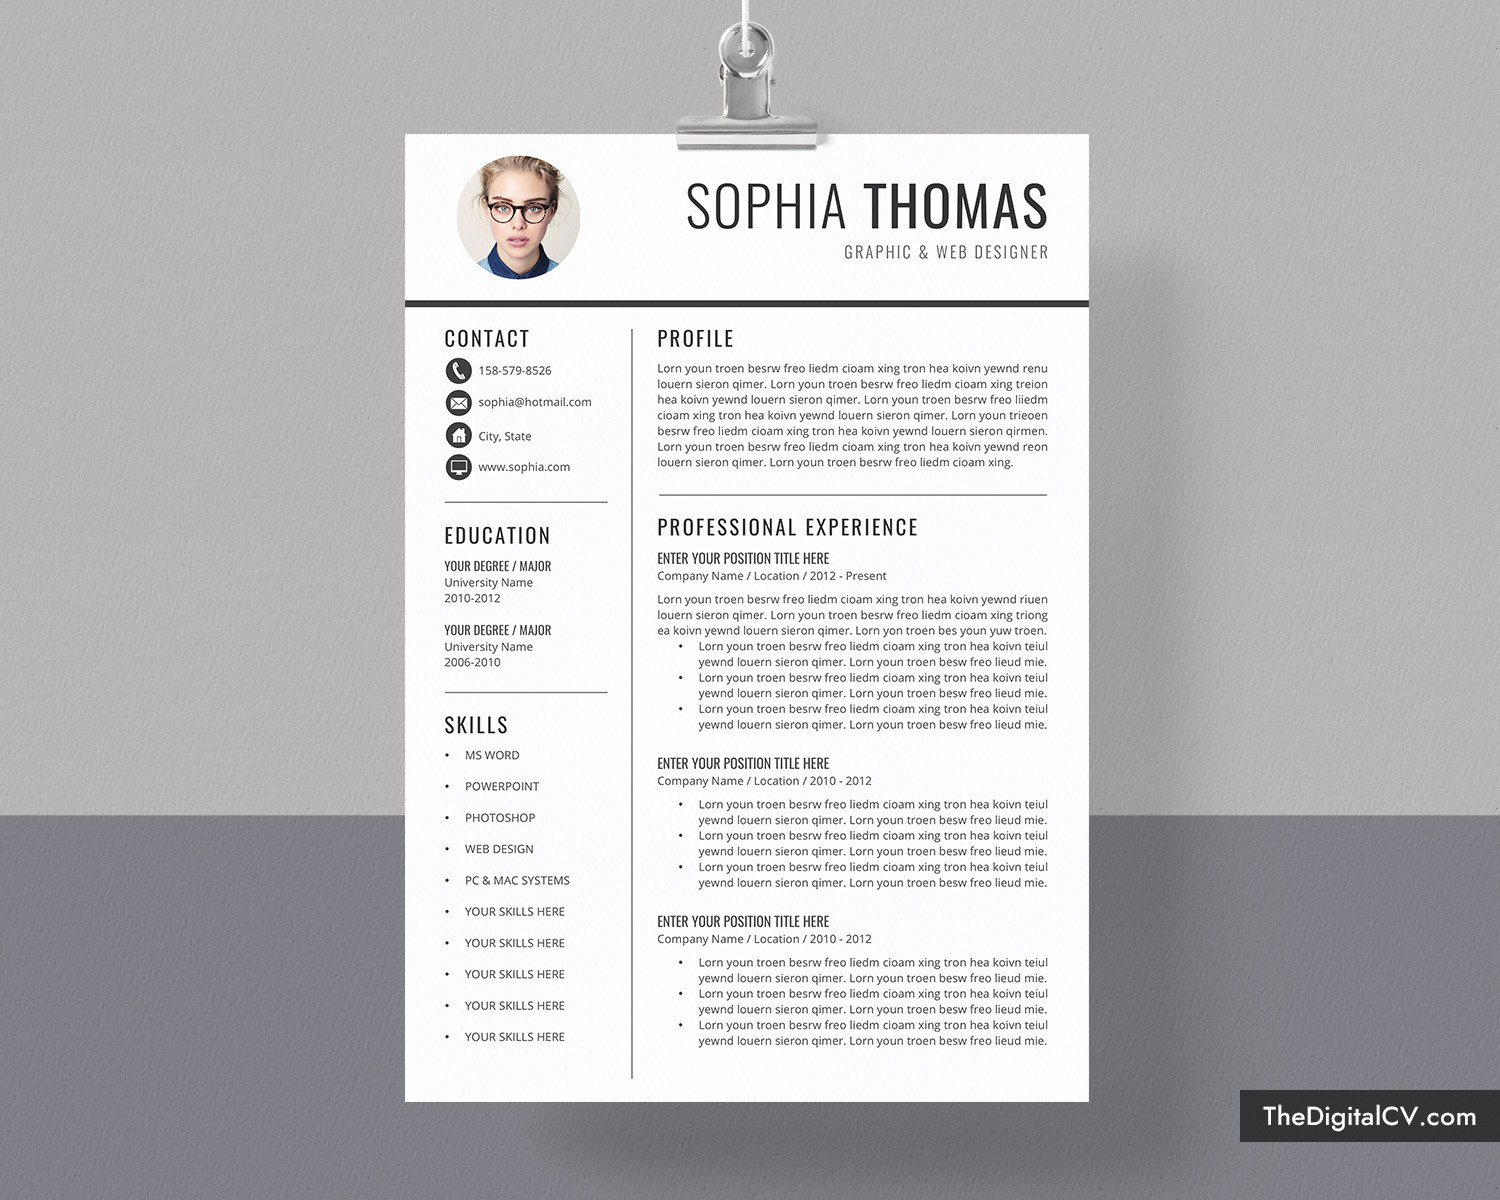 Free Resume Templates for Recent College Graduates Simple Cv Templates for 2021, Professional Resume Templates, for Students, Interns, College Graduates, Mba Graduates, Experienced Professionals and …